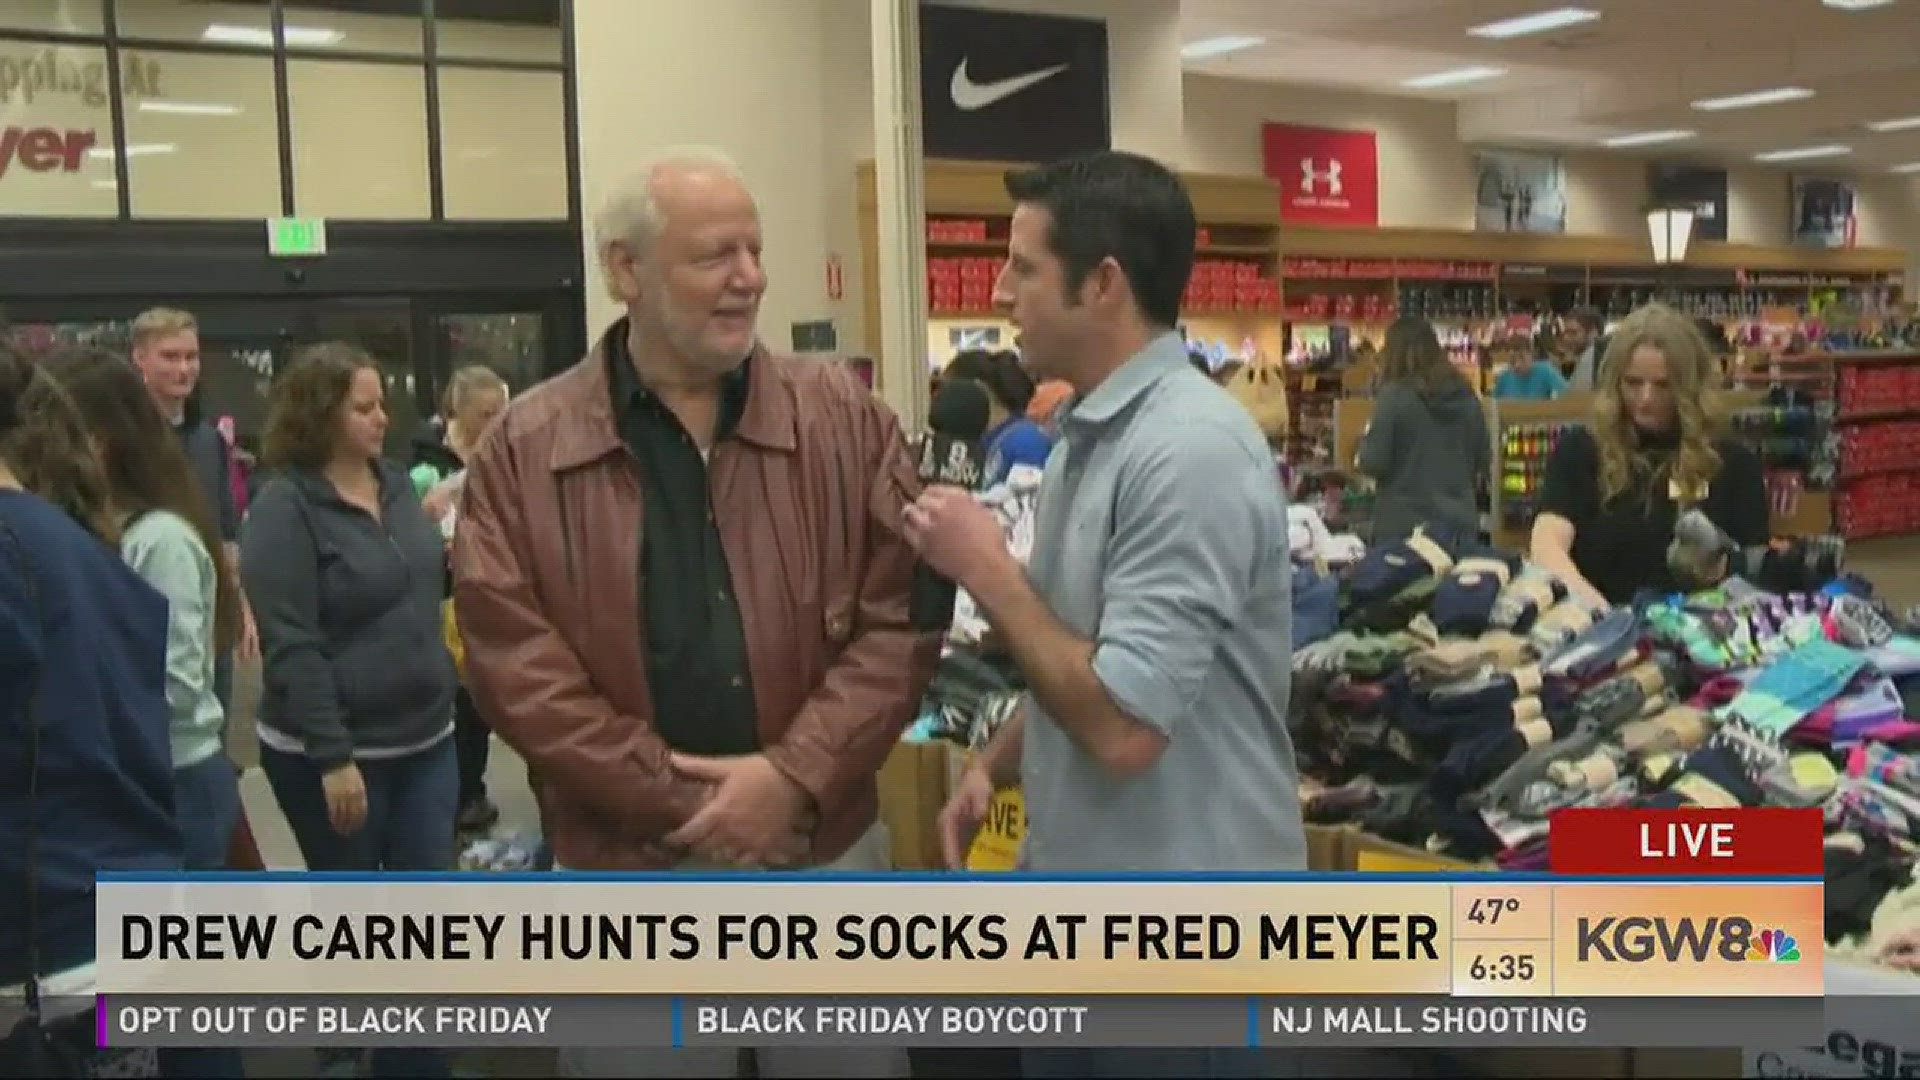 The traditional holiday shopping frenzy kicks off at Fred Meyer where Drew Carney is in Beaverton for Black Friday